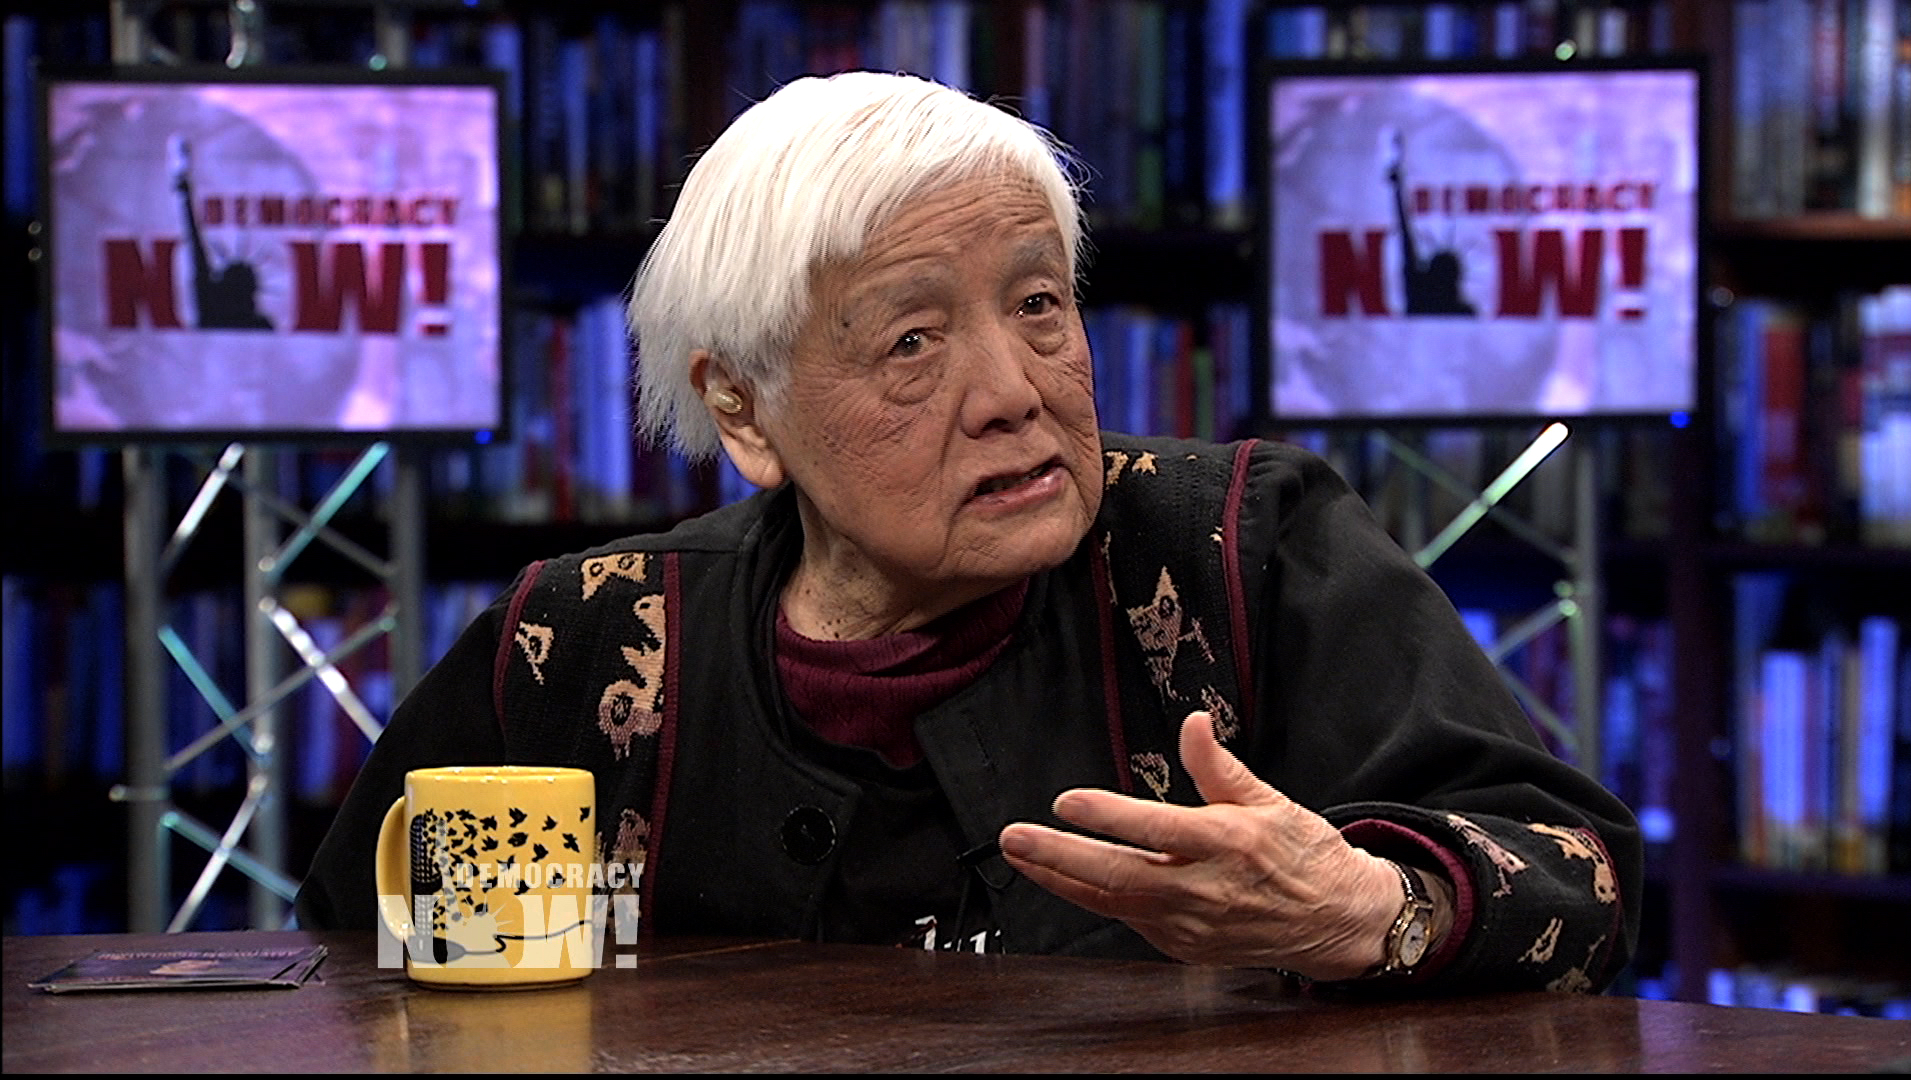 Remembering Grace Lee Boggs (1915-2015): “We Have to Change Ourselves